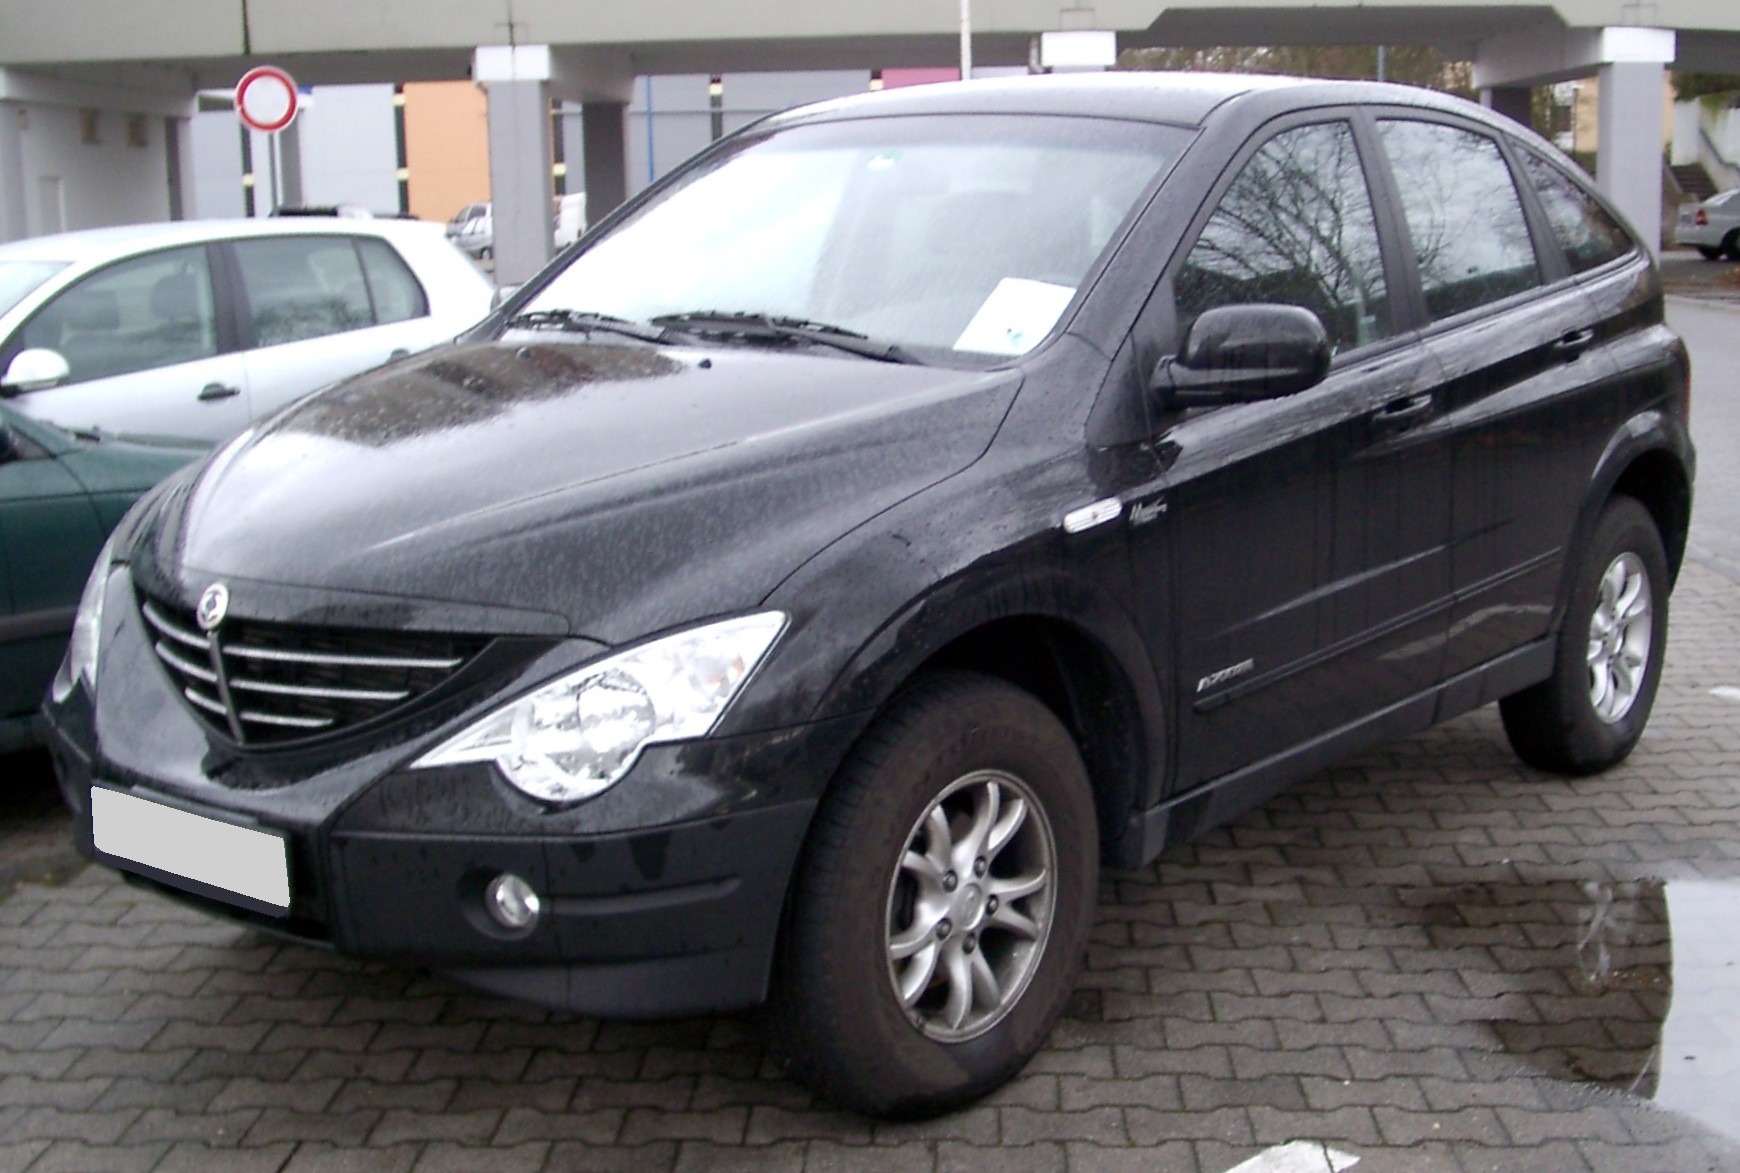 File:SsangYong Actyon front 20080303.jpg - Wikimedia Commons